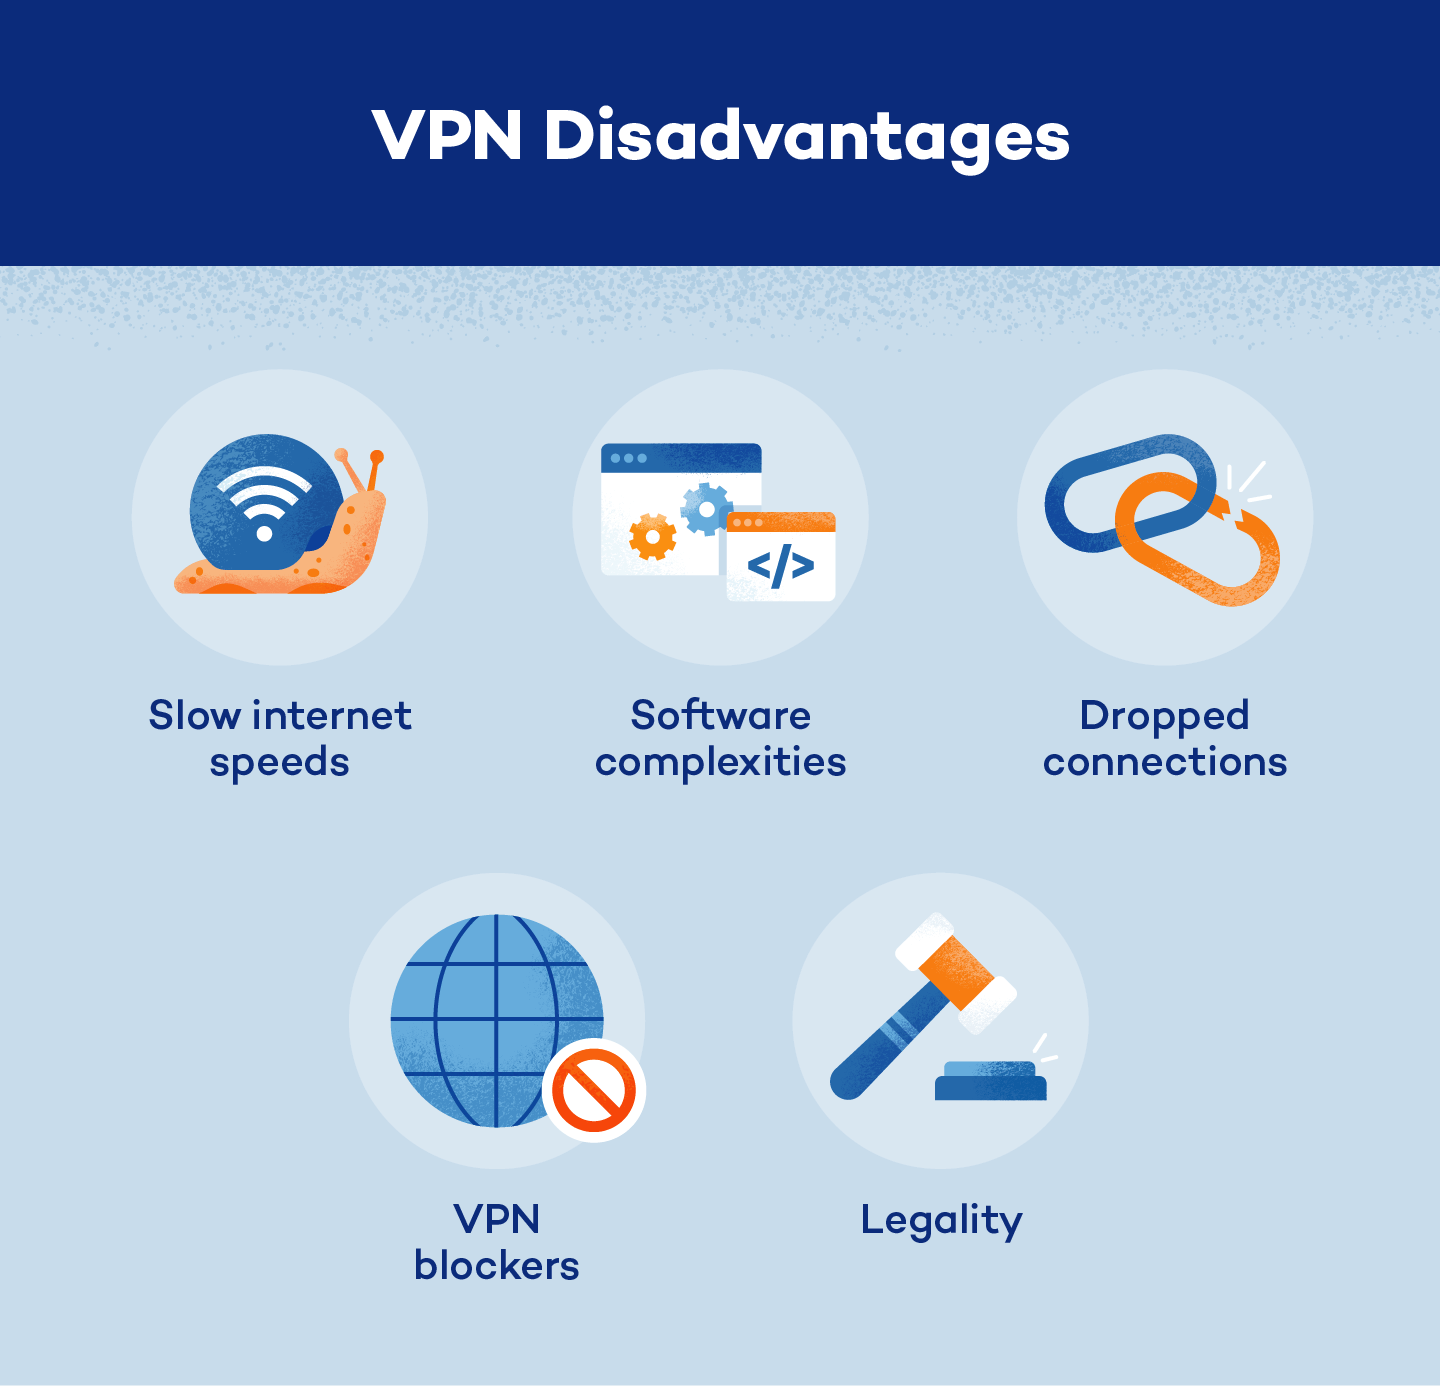 Slow internet speeds and lost connections are two of the disadvantages of using a VPN.